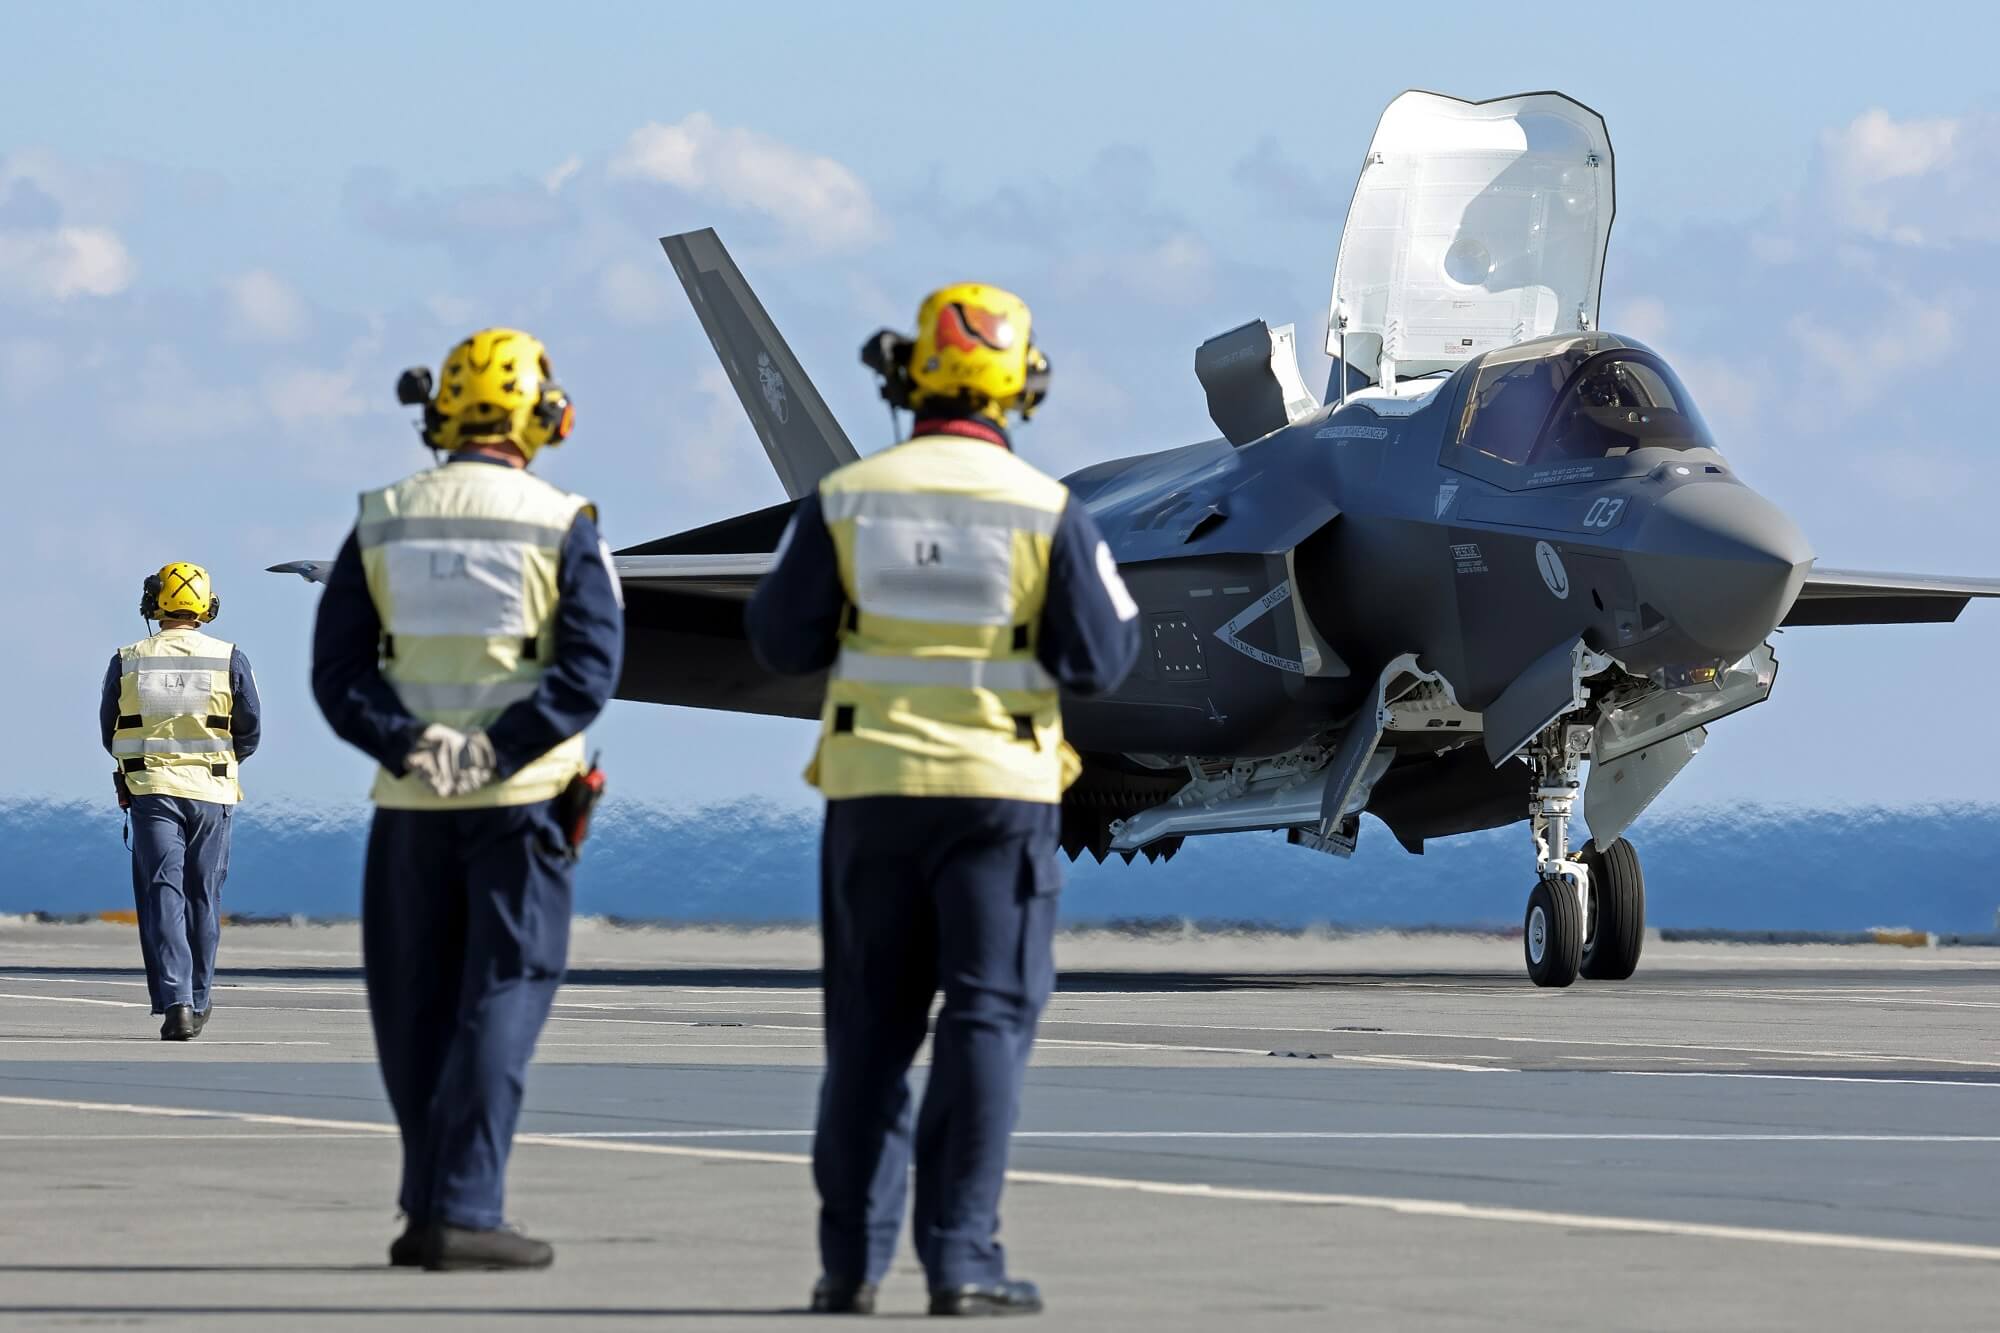 UK and NATO rush to recover F-35B wreckage before Russia - AeroTime